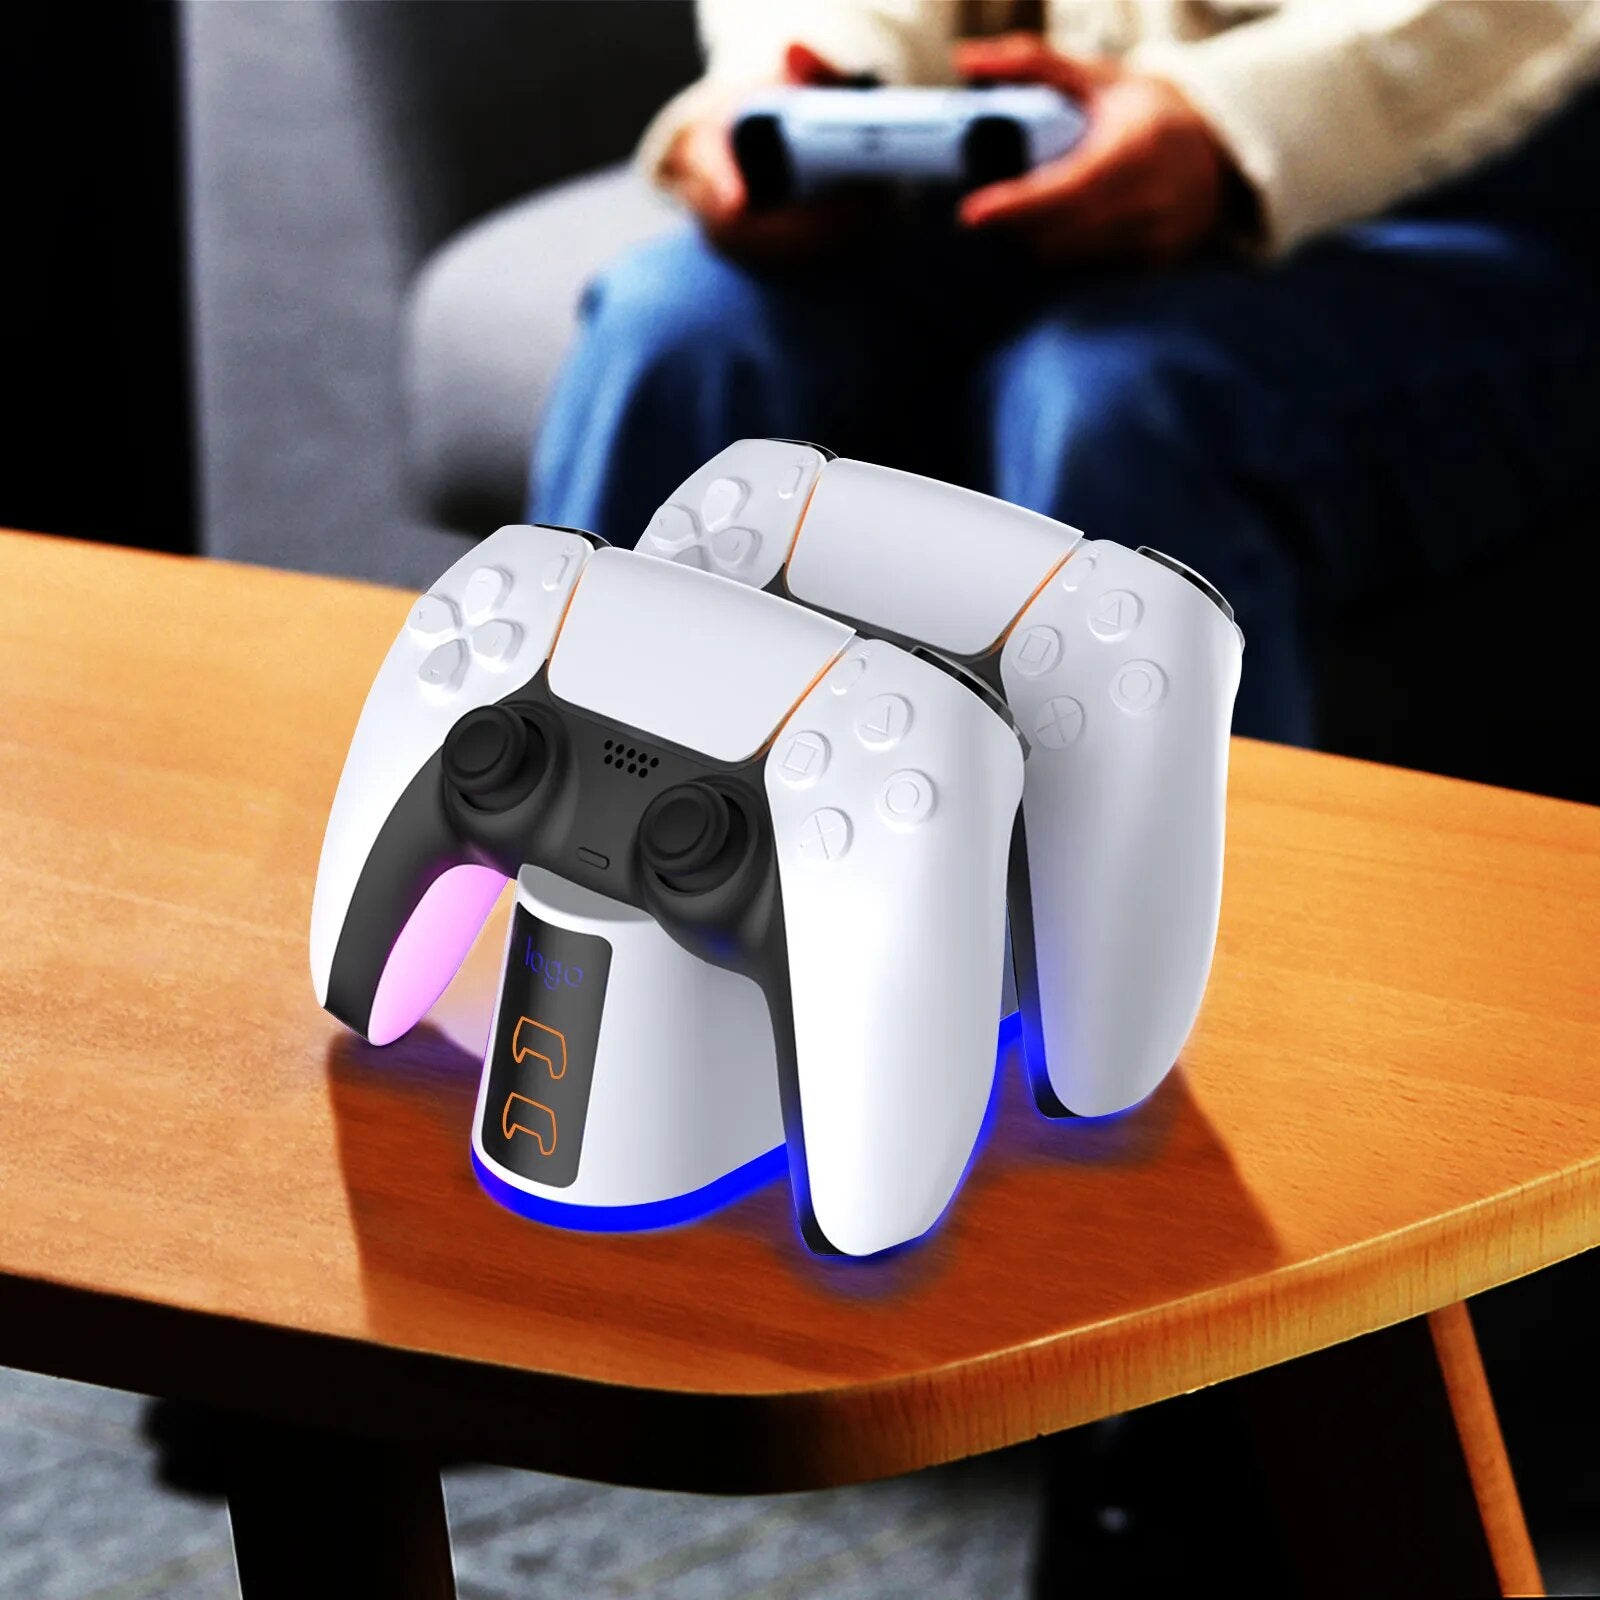 For PS5 controller charger base station with RGB fast charging Fully charged automatic stop For PS5 handle charger storage stand